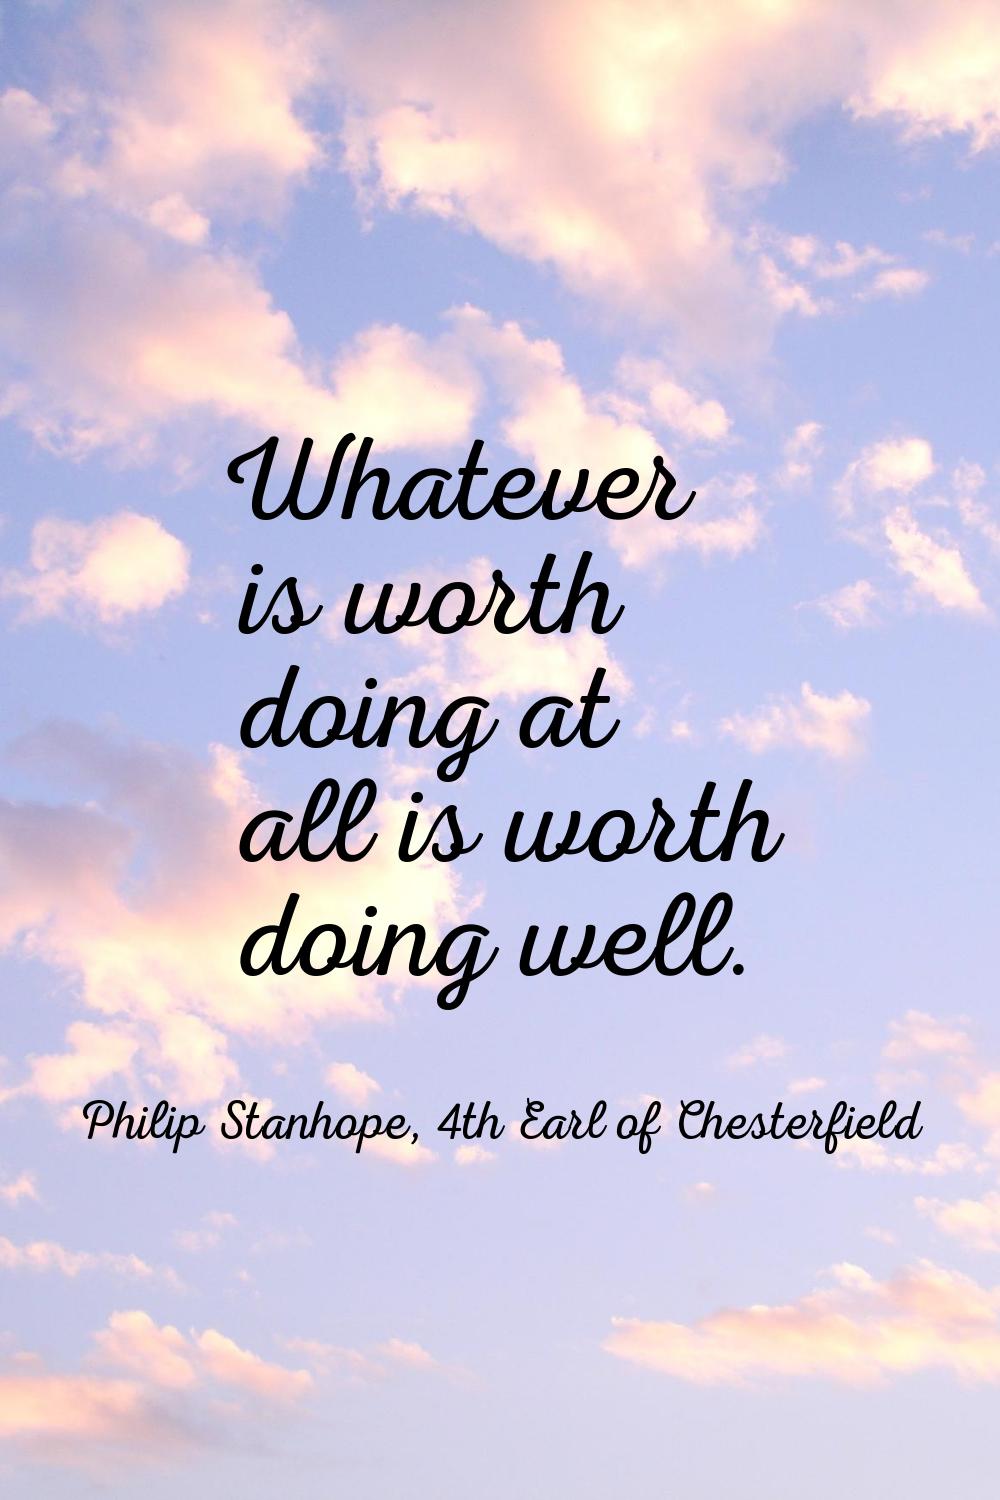 Whatever is worth doing at all is worth doing well.